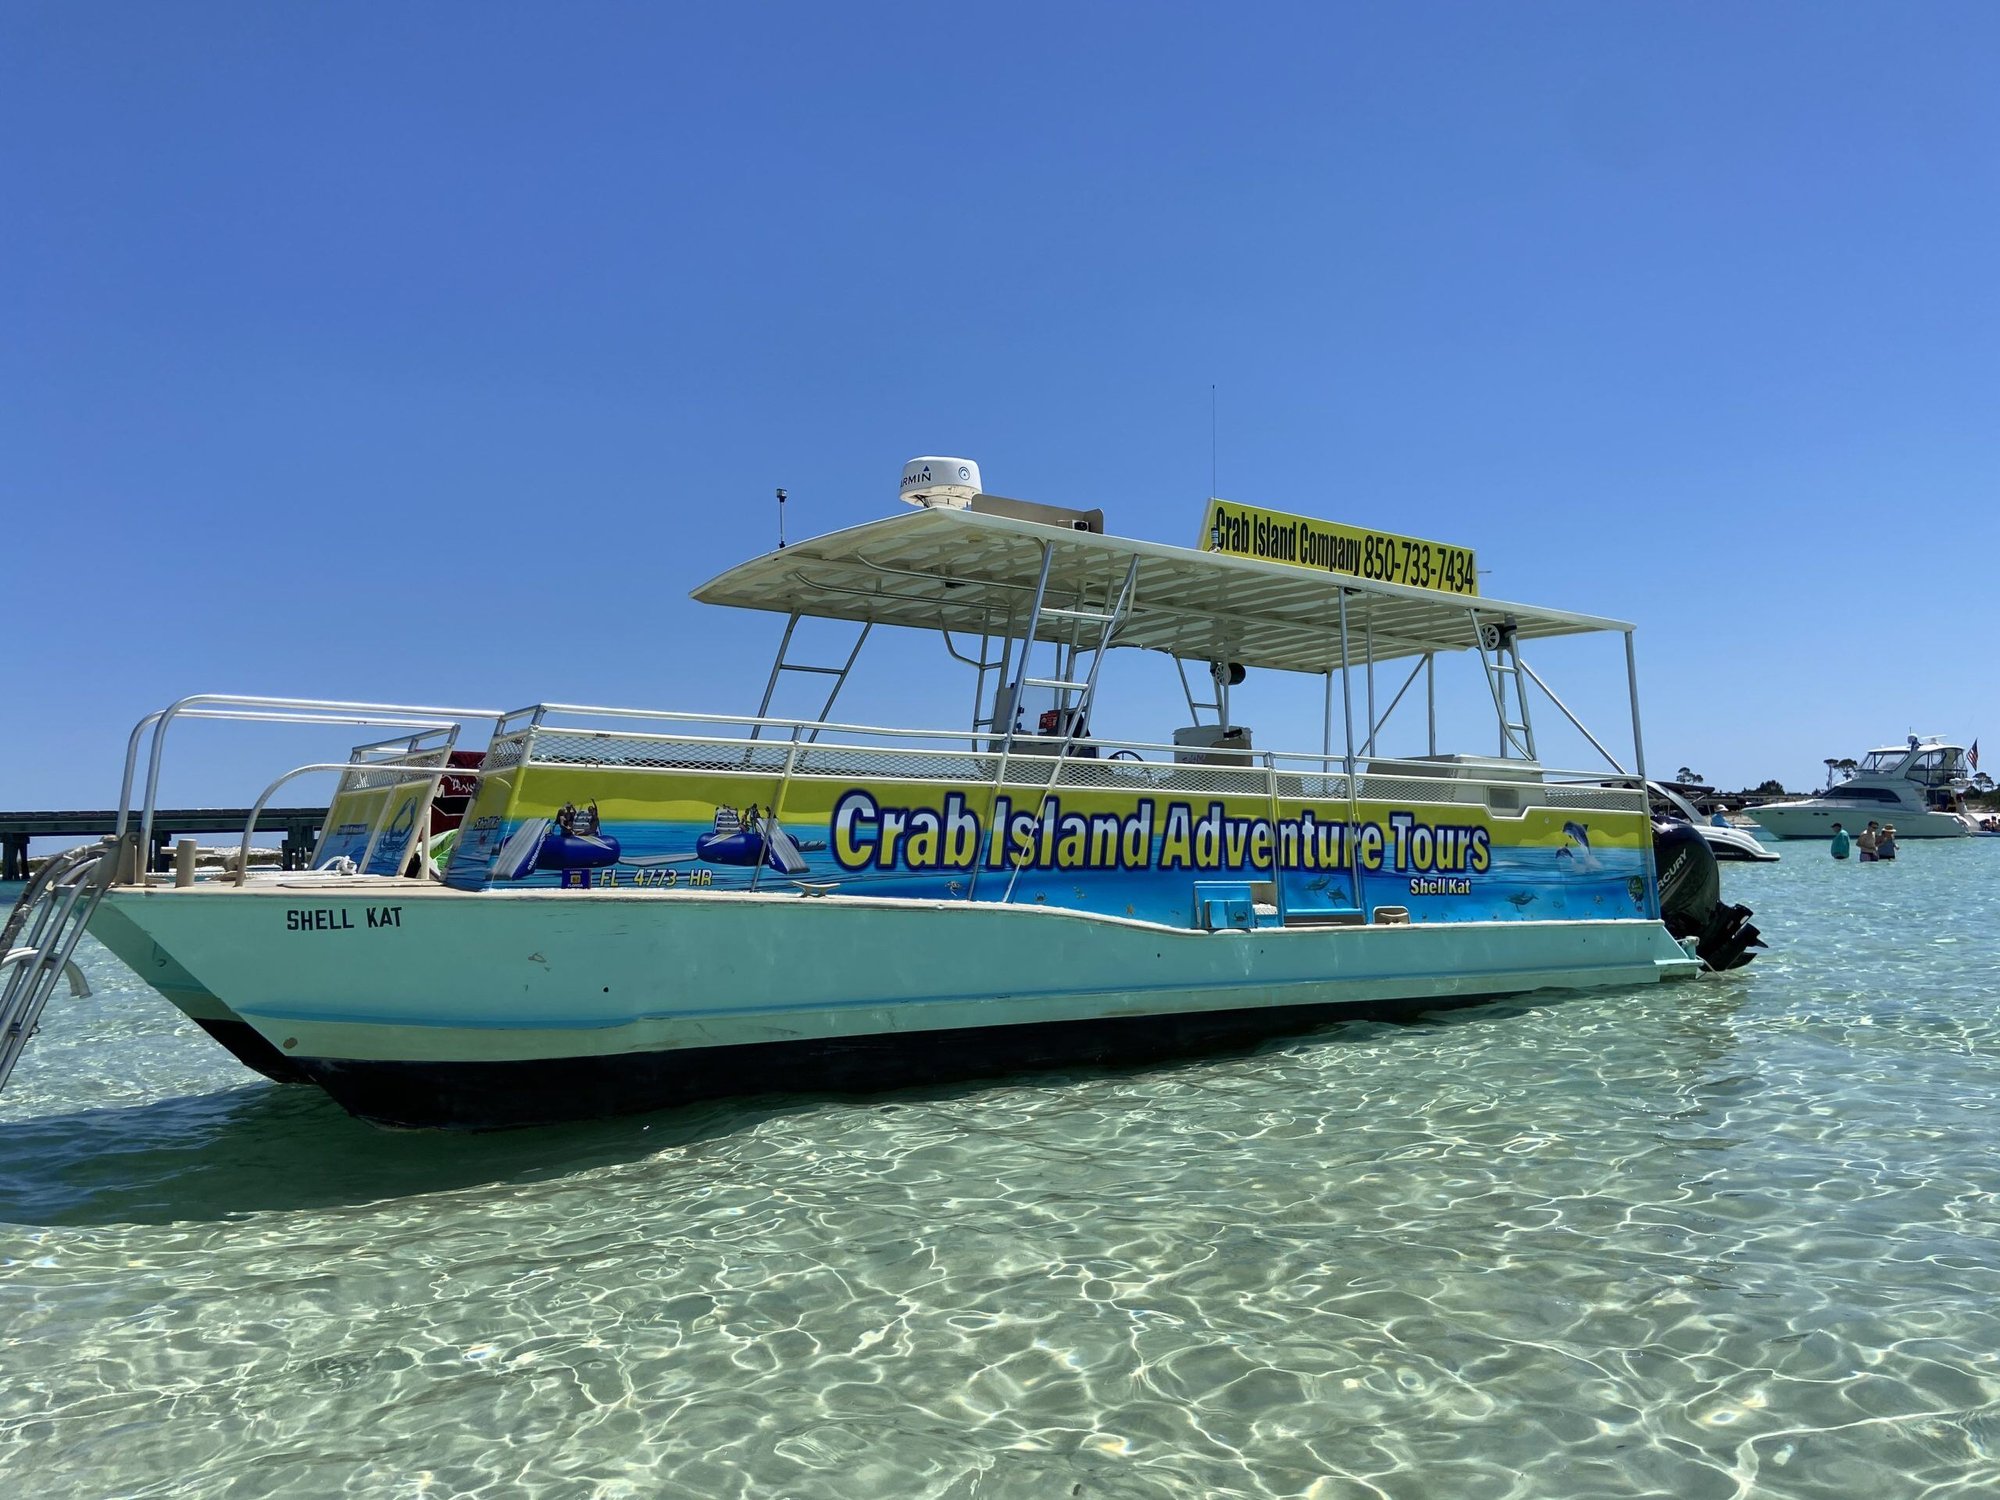 adventure tour boat in the water at crab island